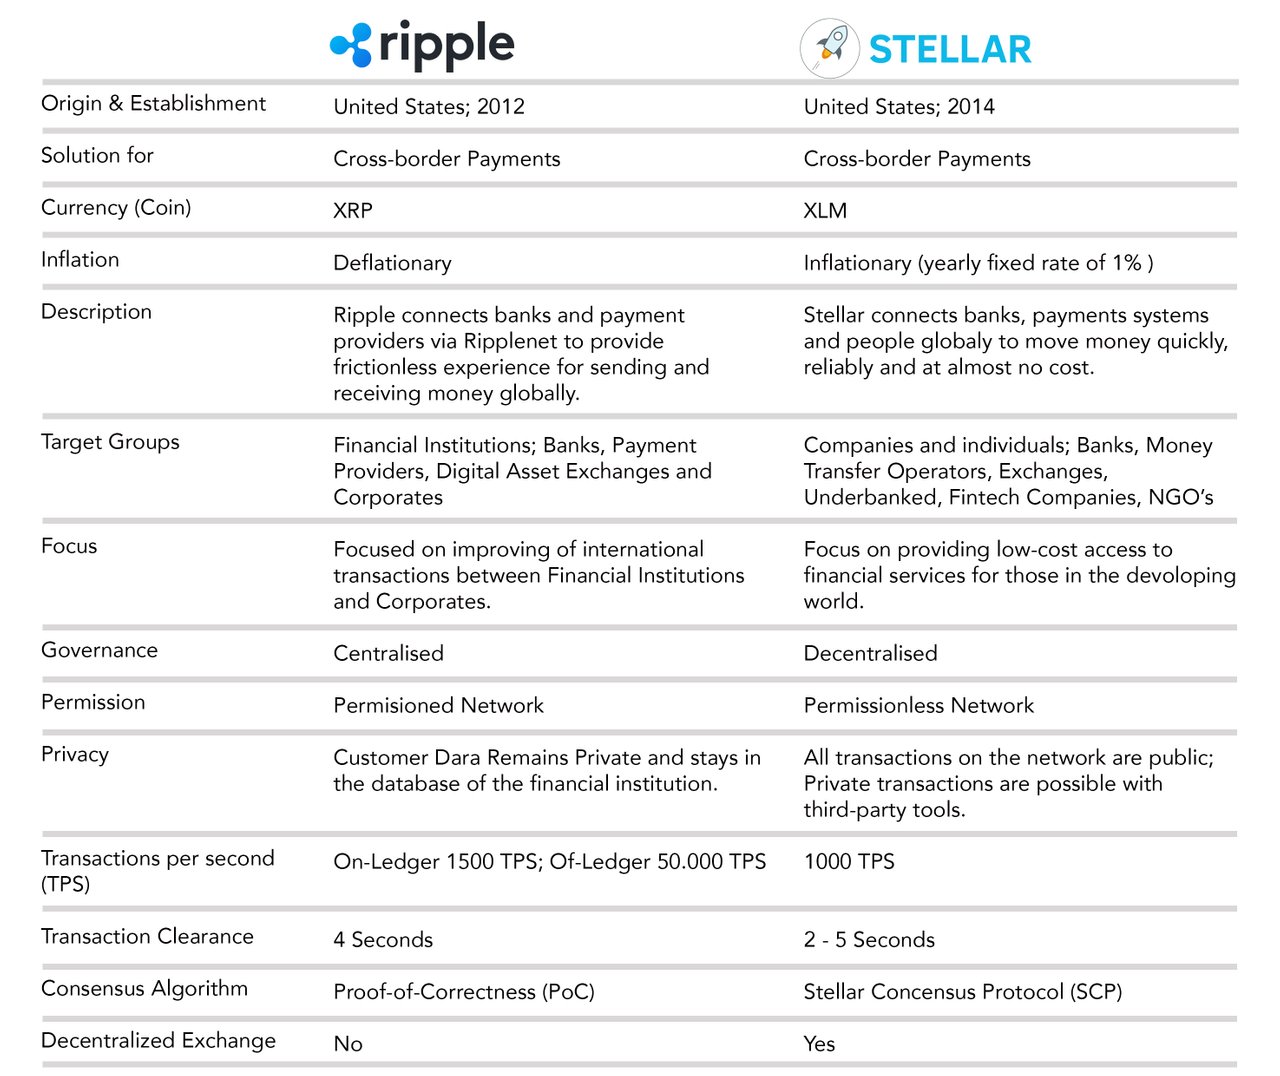 Comparsion of the Ripple and Stellar